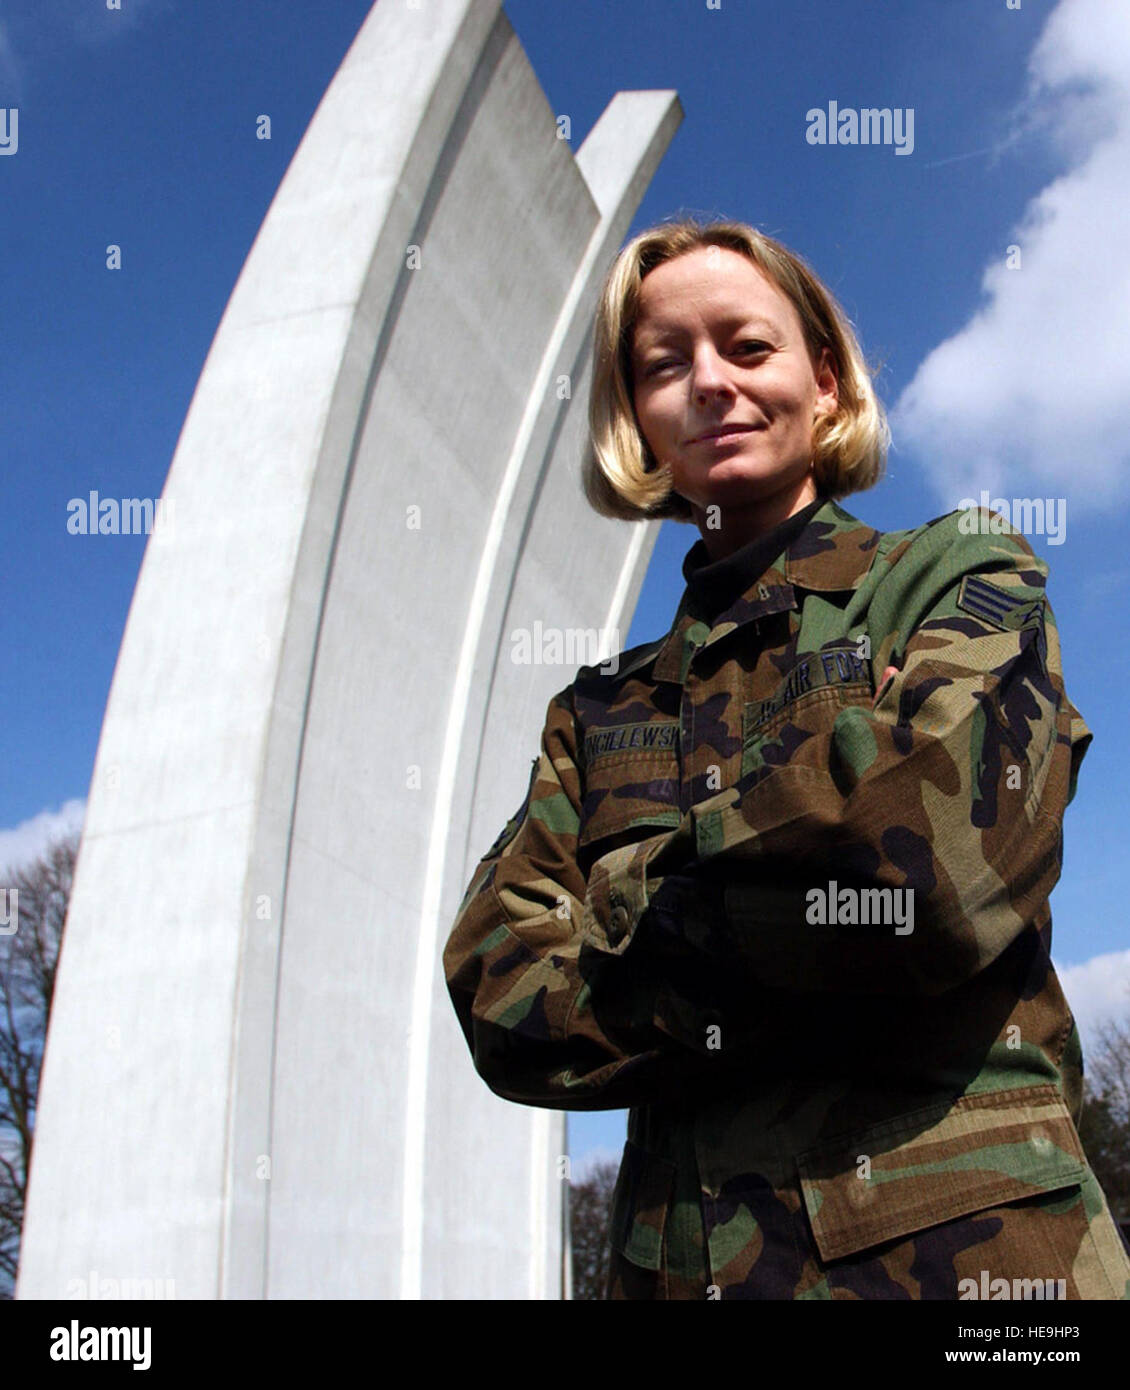 RHEIN-MAIN AIR BASE, Germany -- Senior Airman Anke Dzincielewski pauses near the Berlin Airlift Memorial here.  Dzincielewski grew up in East Germany and remembers life before the Berlin Wall came down.  She is deployed here from Ellsworth Air Force Base, S.D.   Master Sgt. Keith Reed) Stock Photo